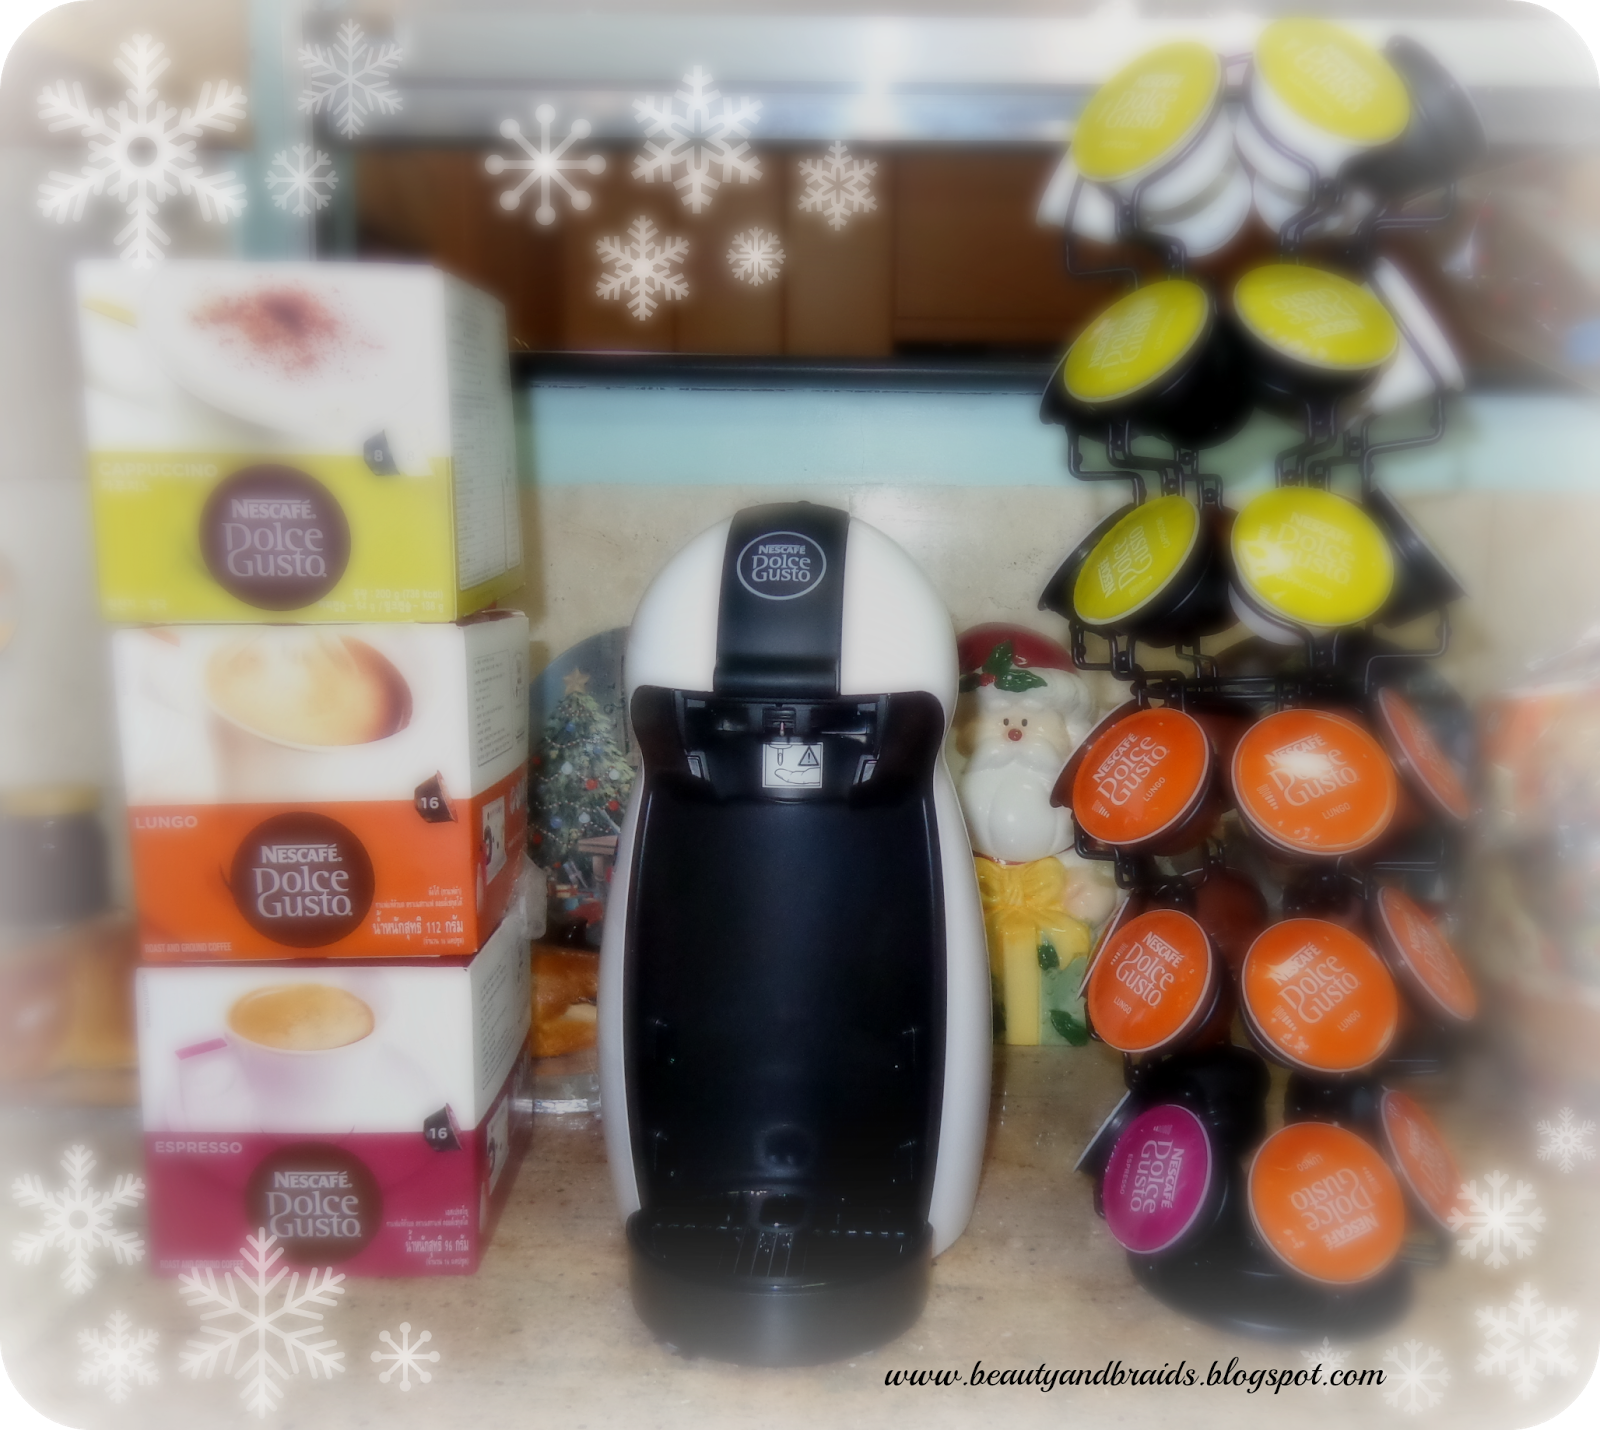 Maker dolce All gusto nescafe Over April Gusto ~ maker Nescafe coffee Dolce Excitement It's Year Coffee